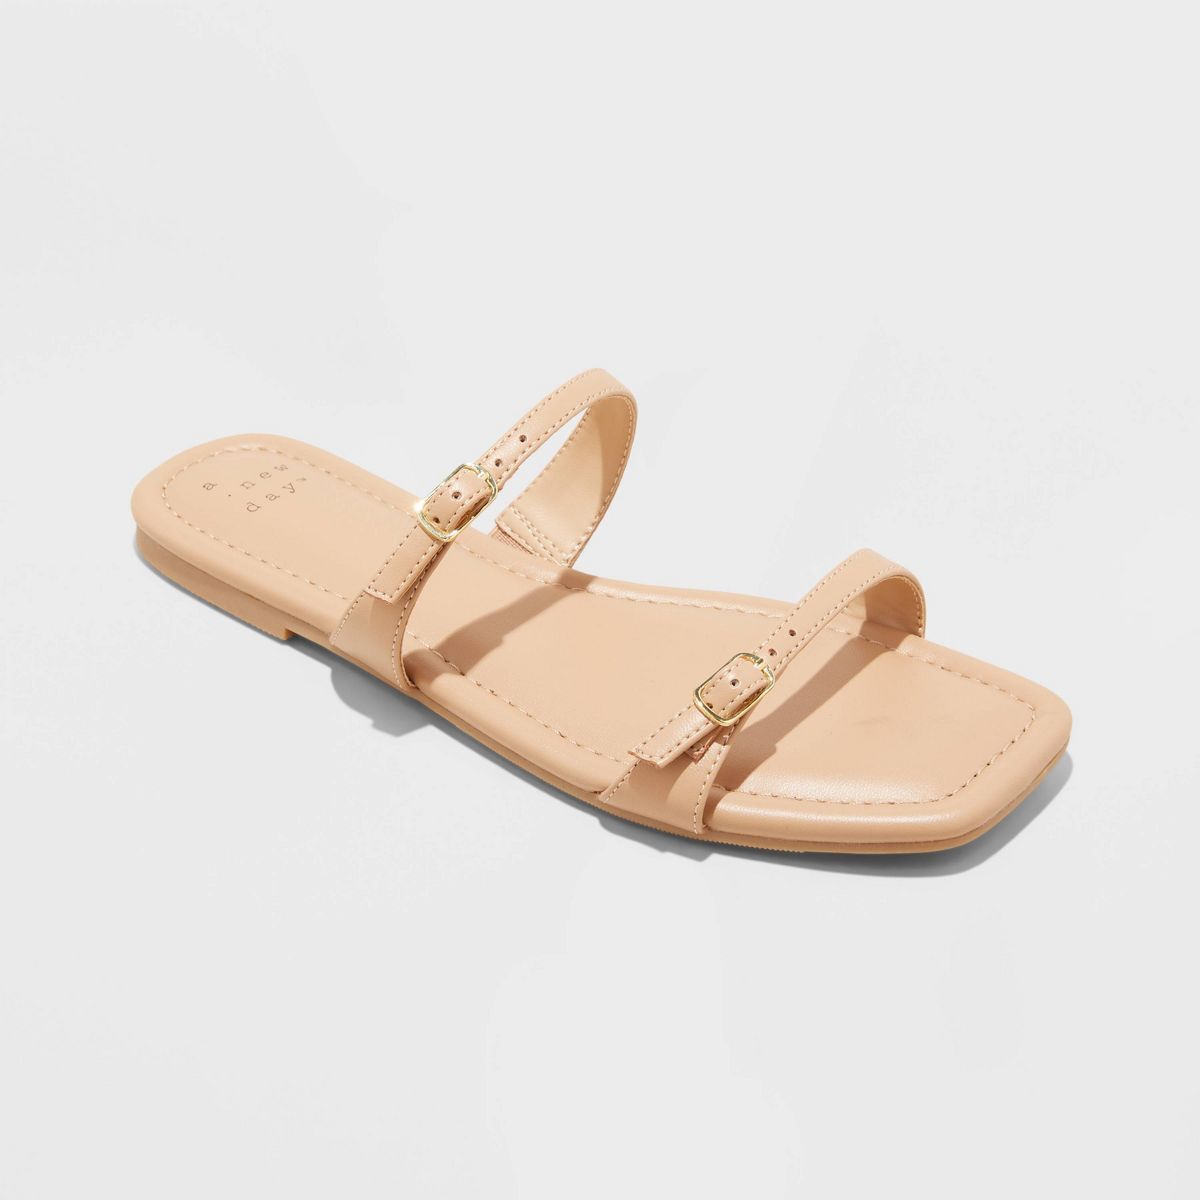 Women's Connie Two Band Buckle Slide Sandals with Memory Foam Insole - A New Day™ Tan 12 | Target